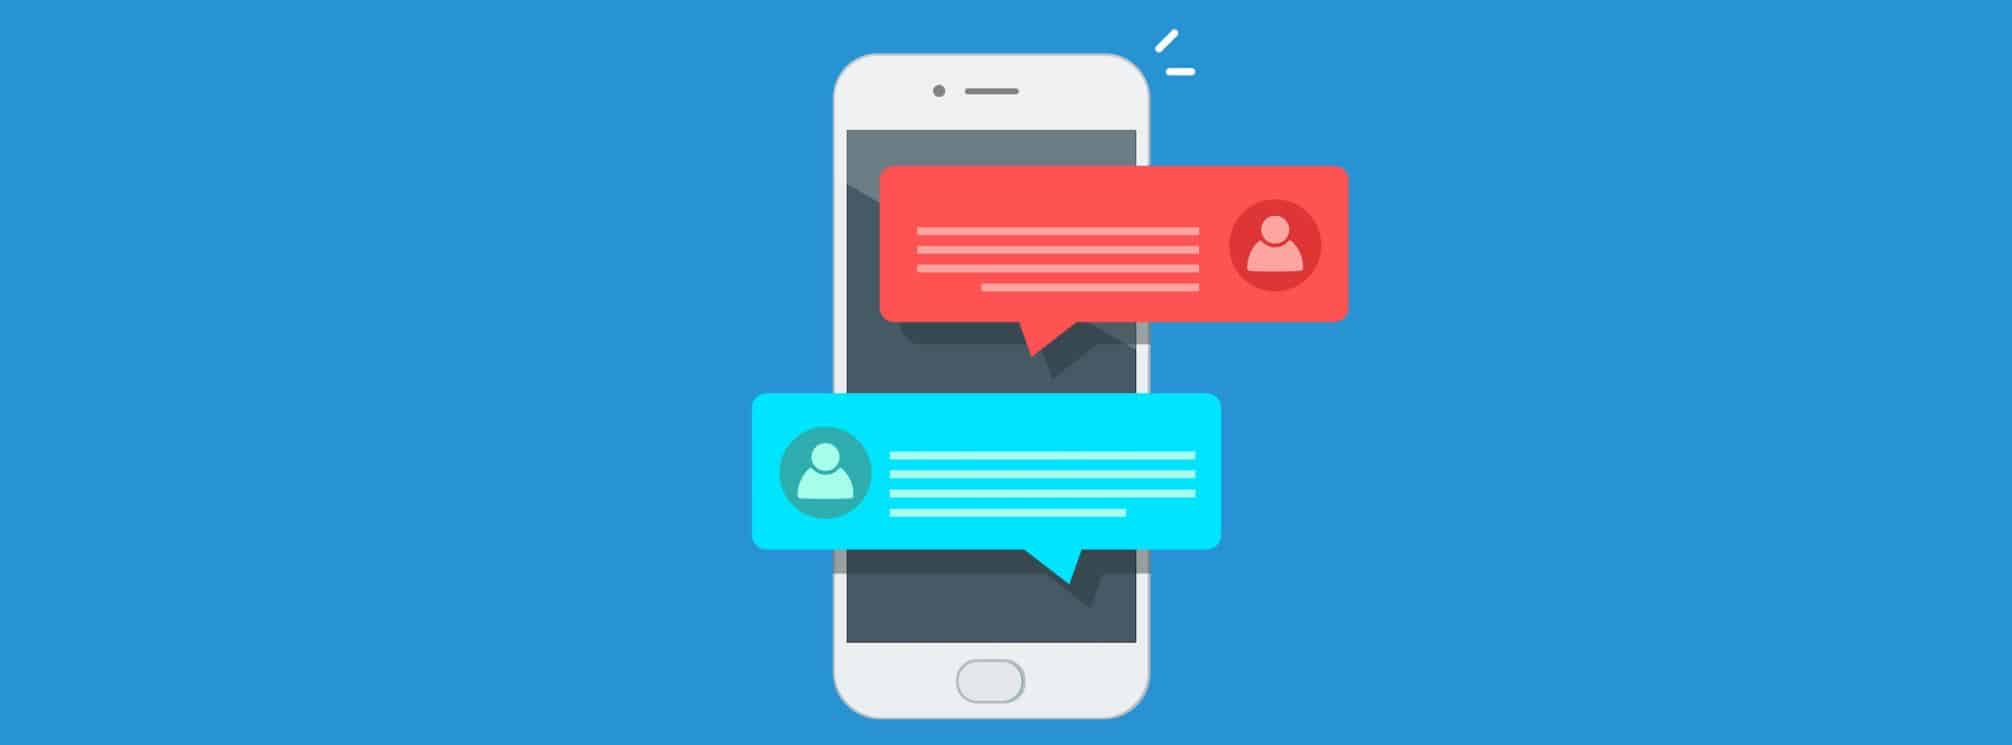 peer to peer chat messages on a phone